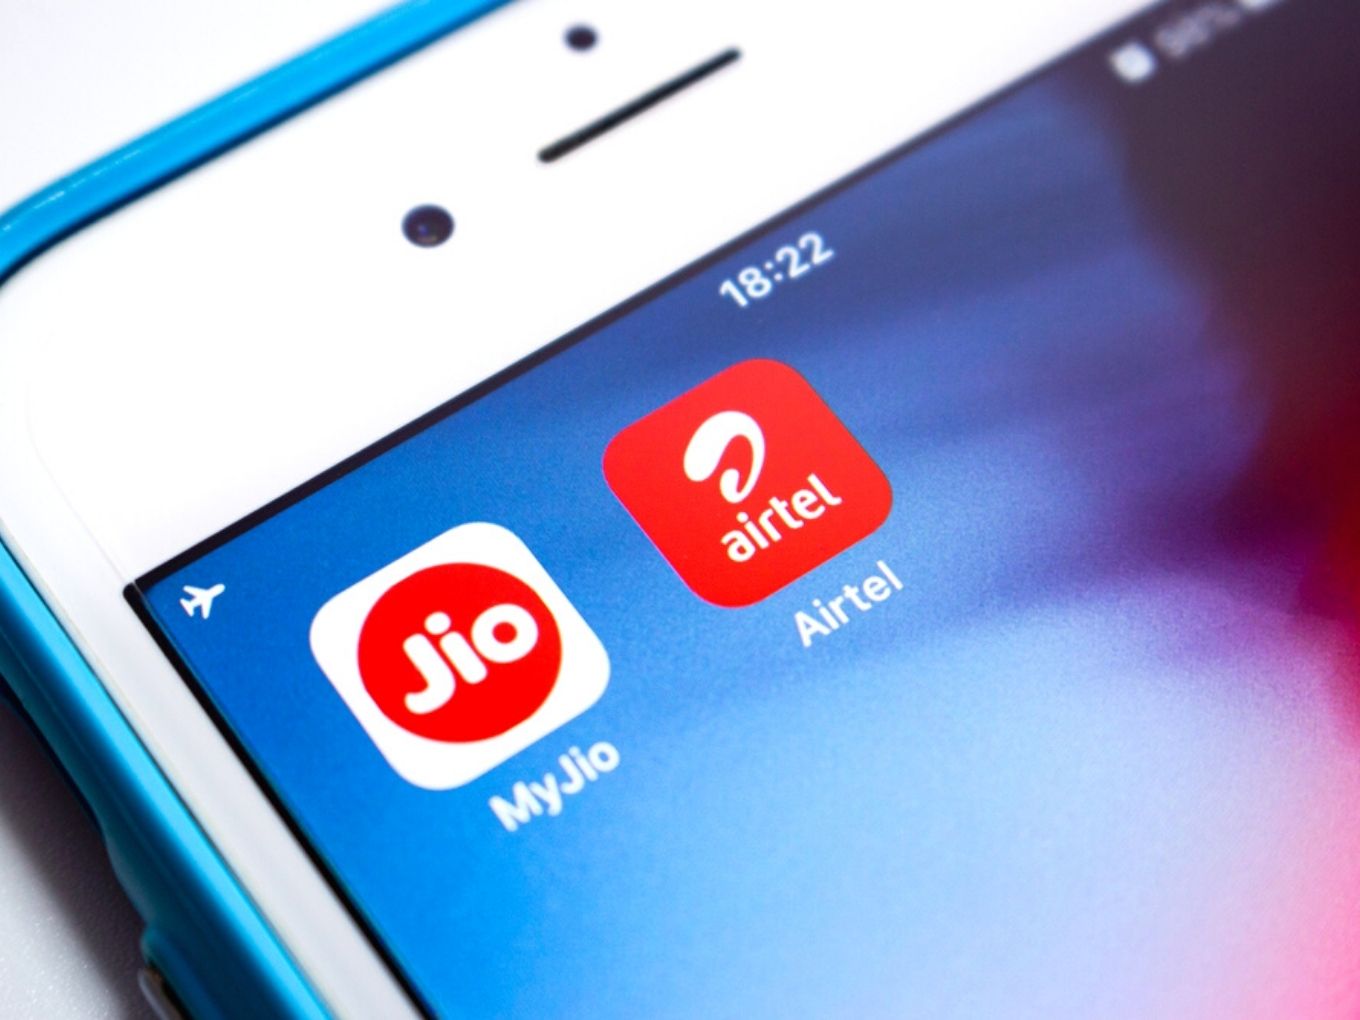 Bharti Airtel Added 1 Mn More Users Than Reliance Jio In August